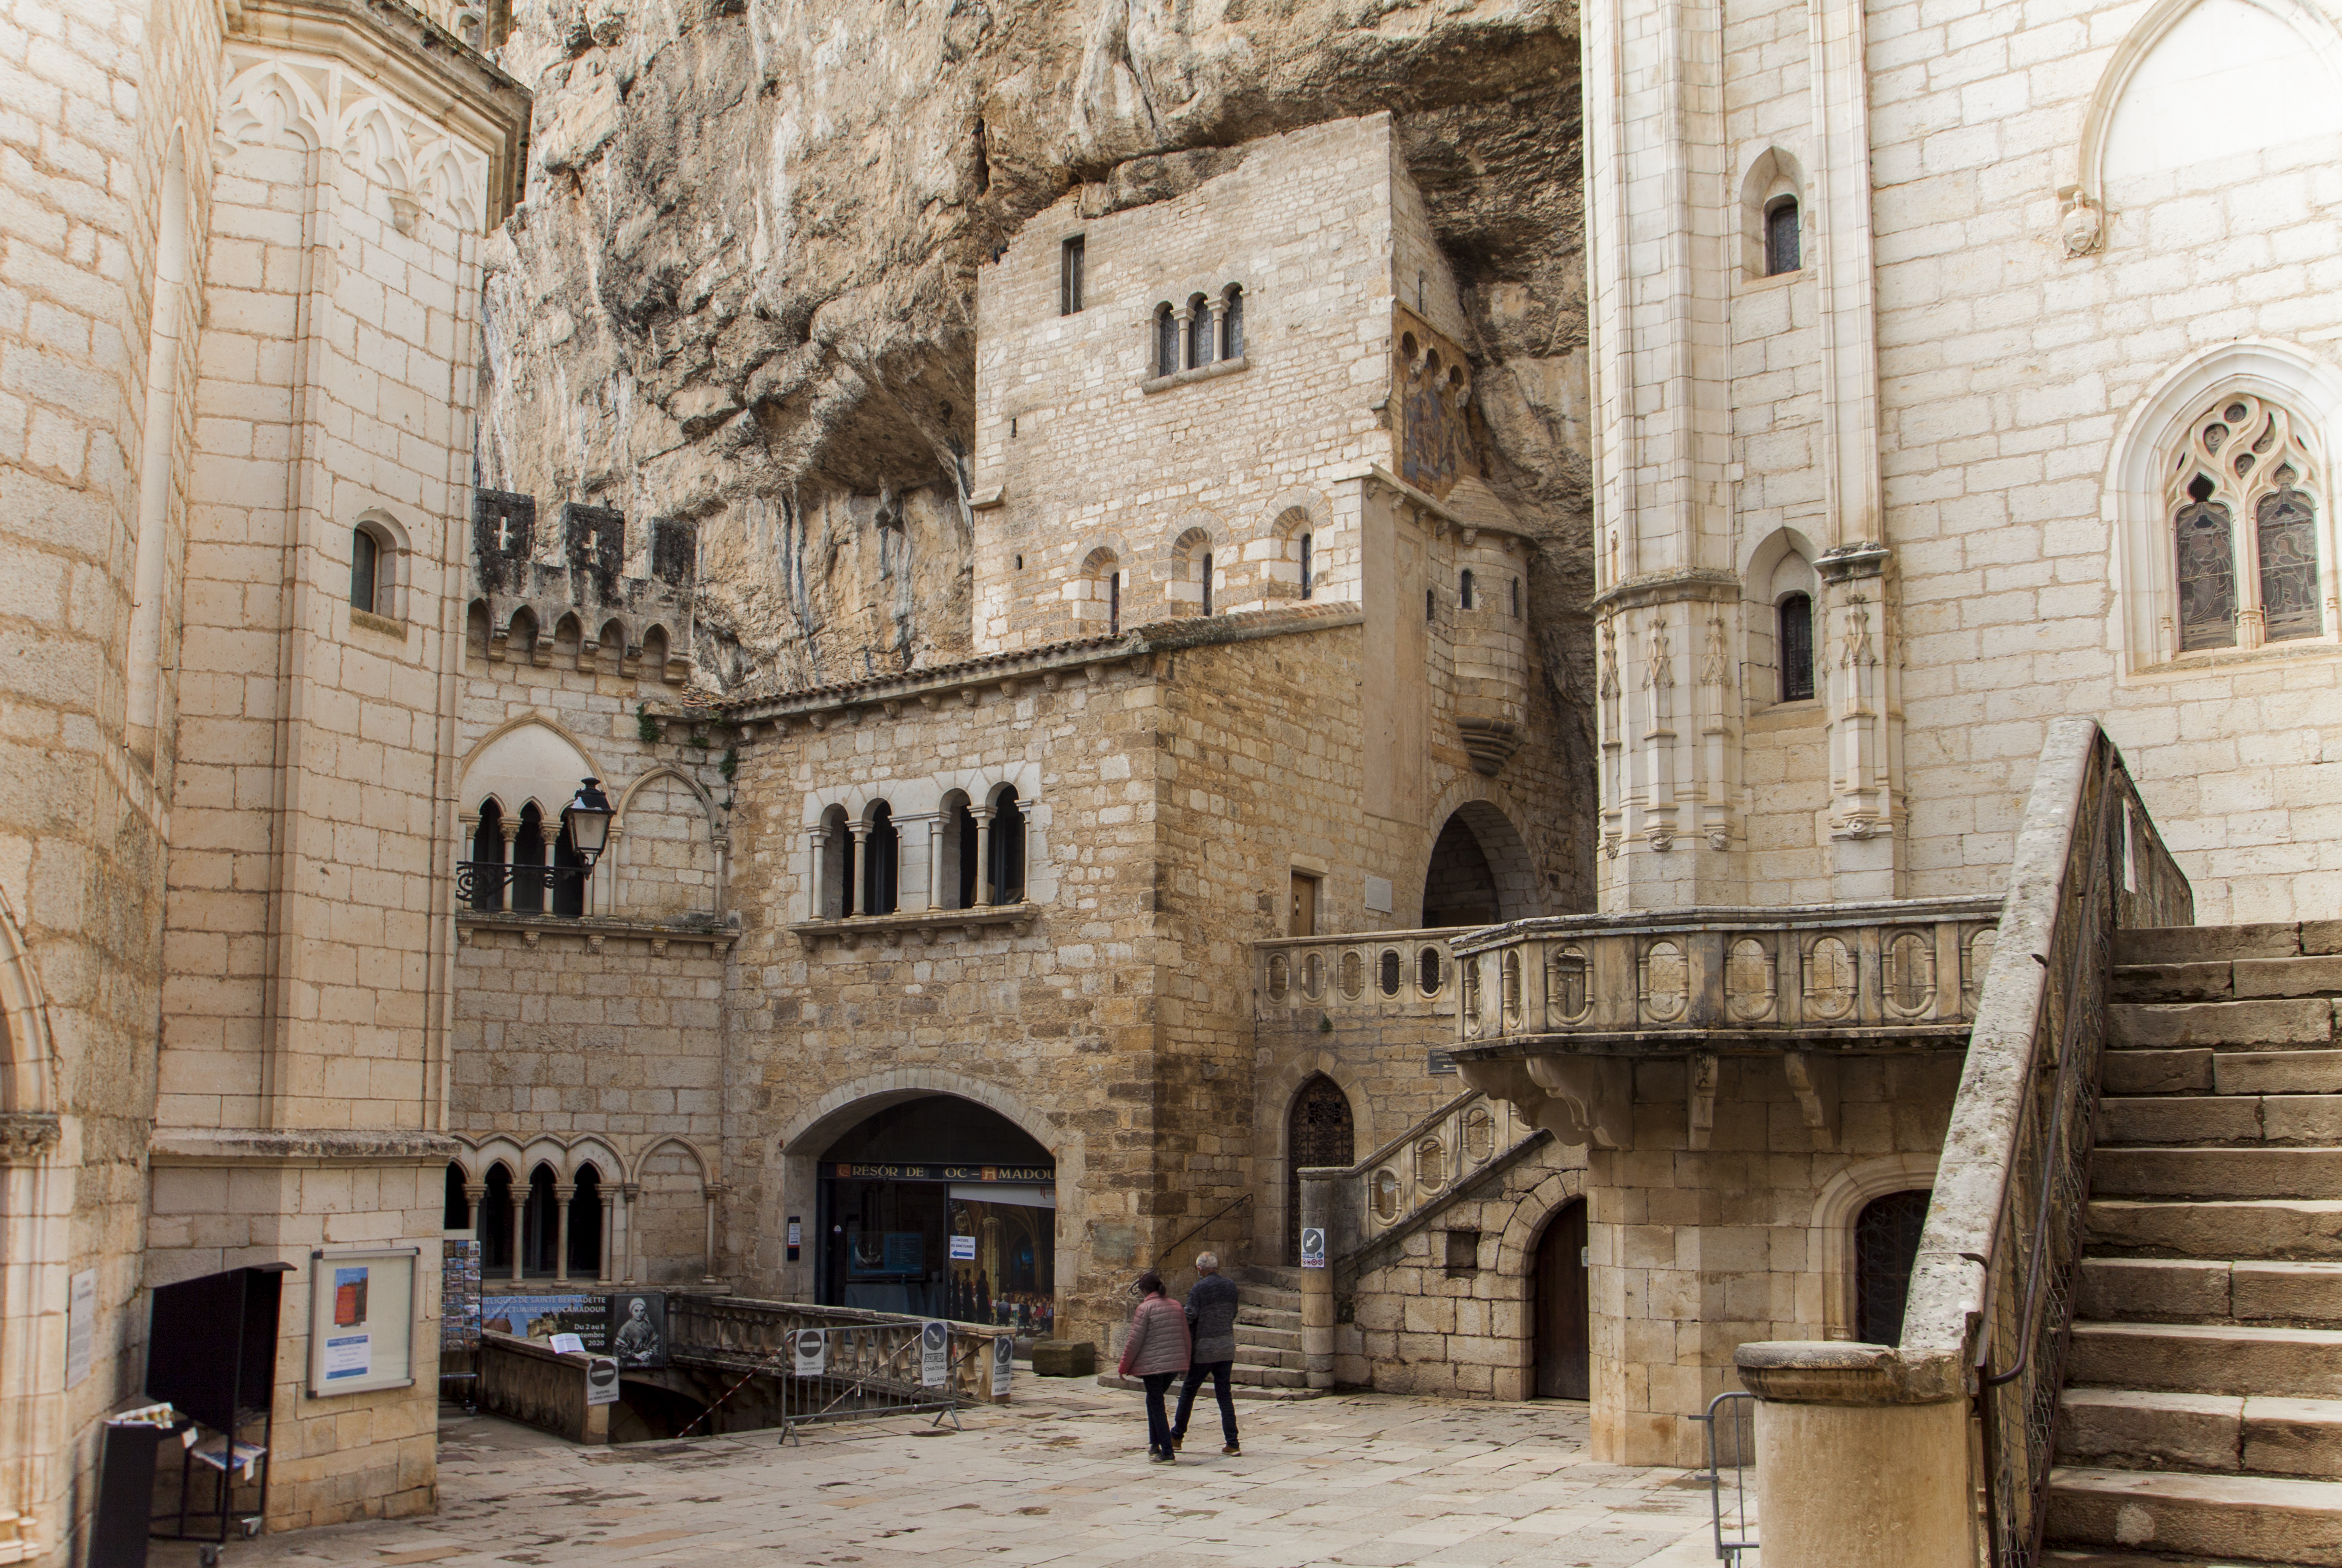 Rocamadour, France reminds me of Minas Tirith : r/lotr